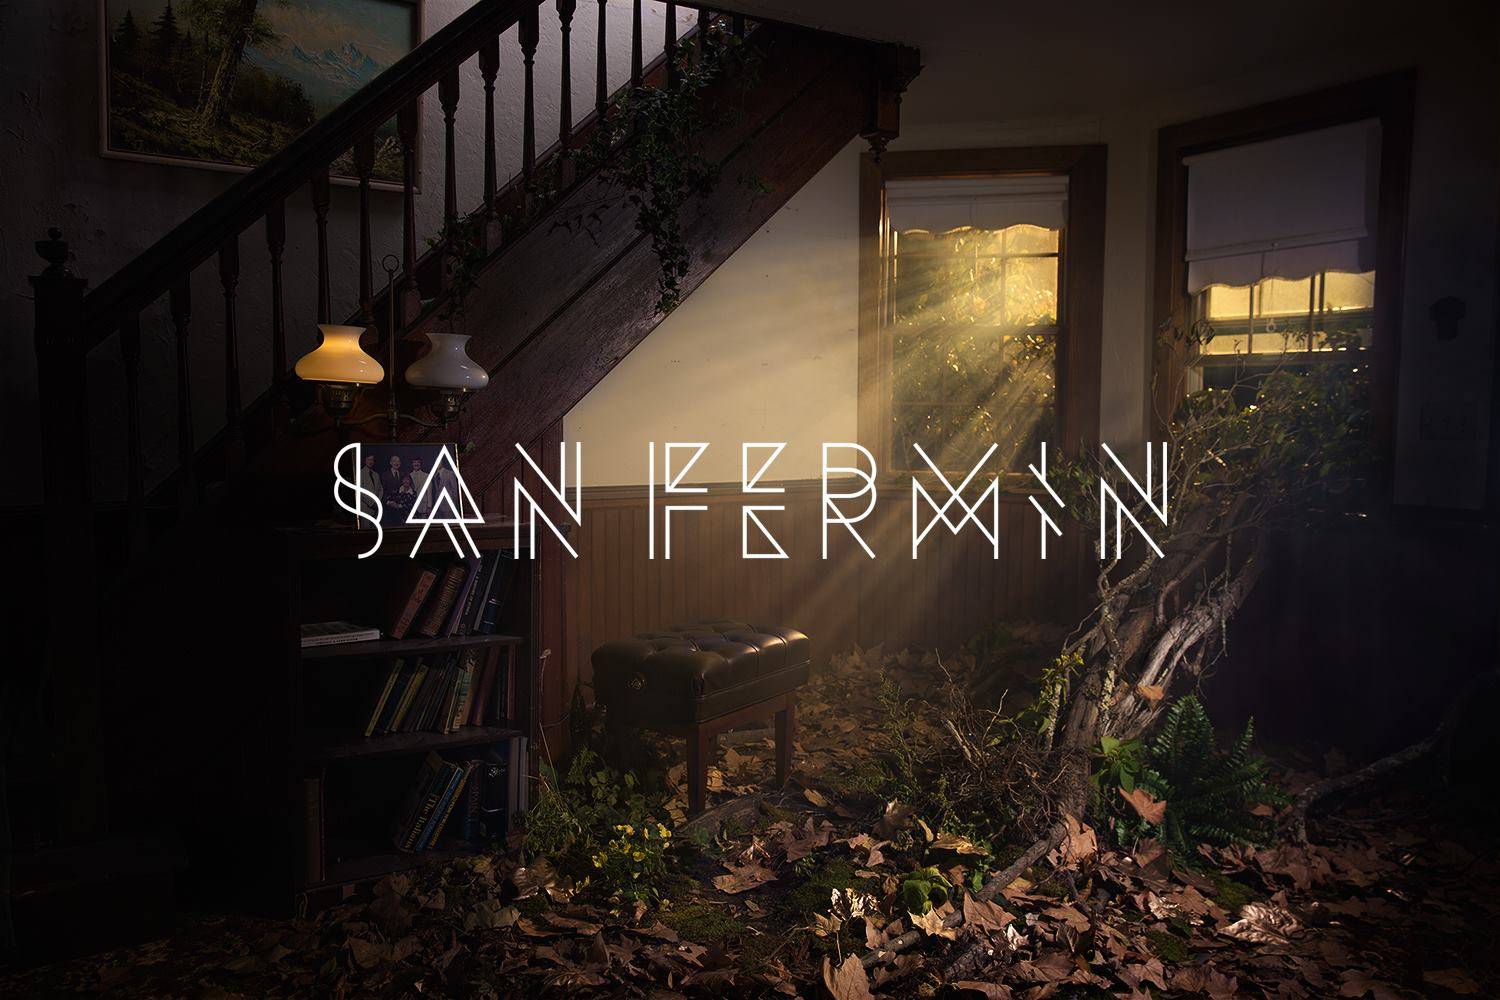 Into the woods with San Fermin